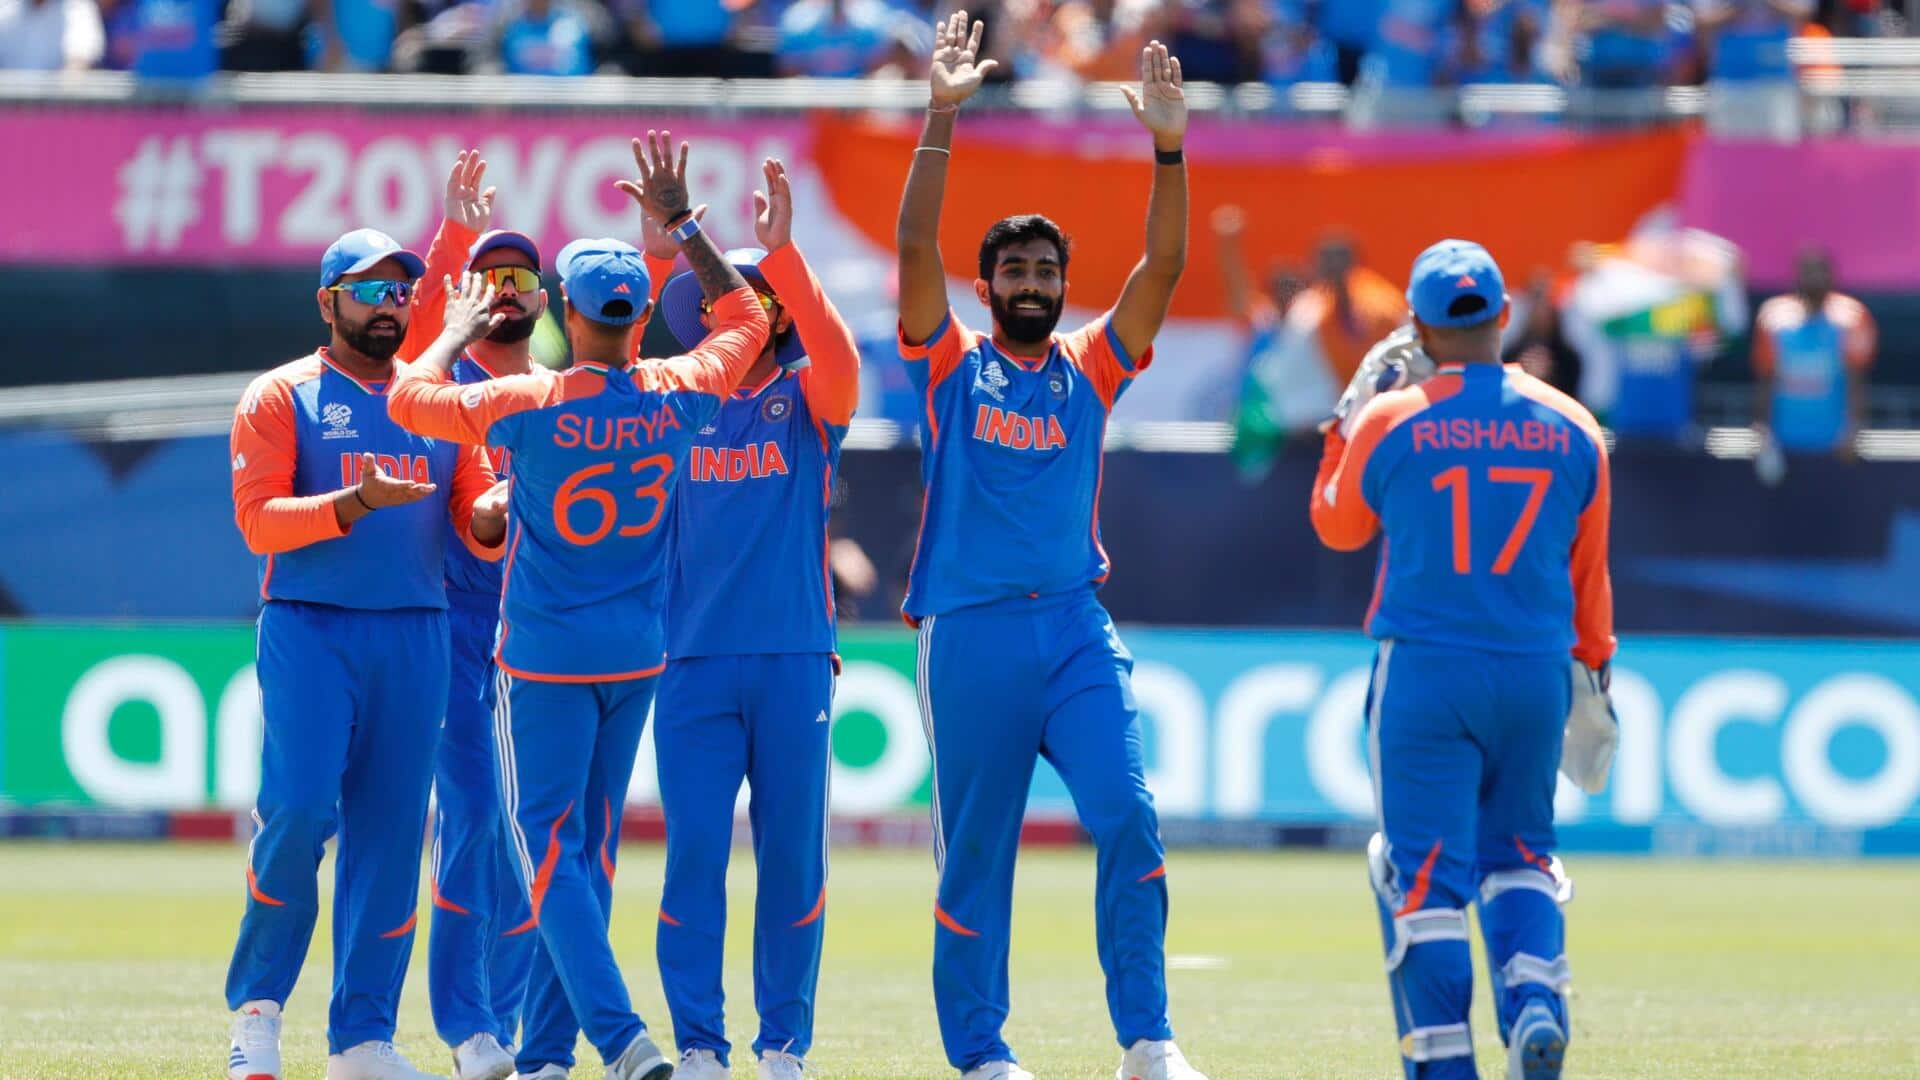 Decoding lowest targets successfully defended by India in T20Is